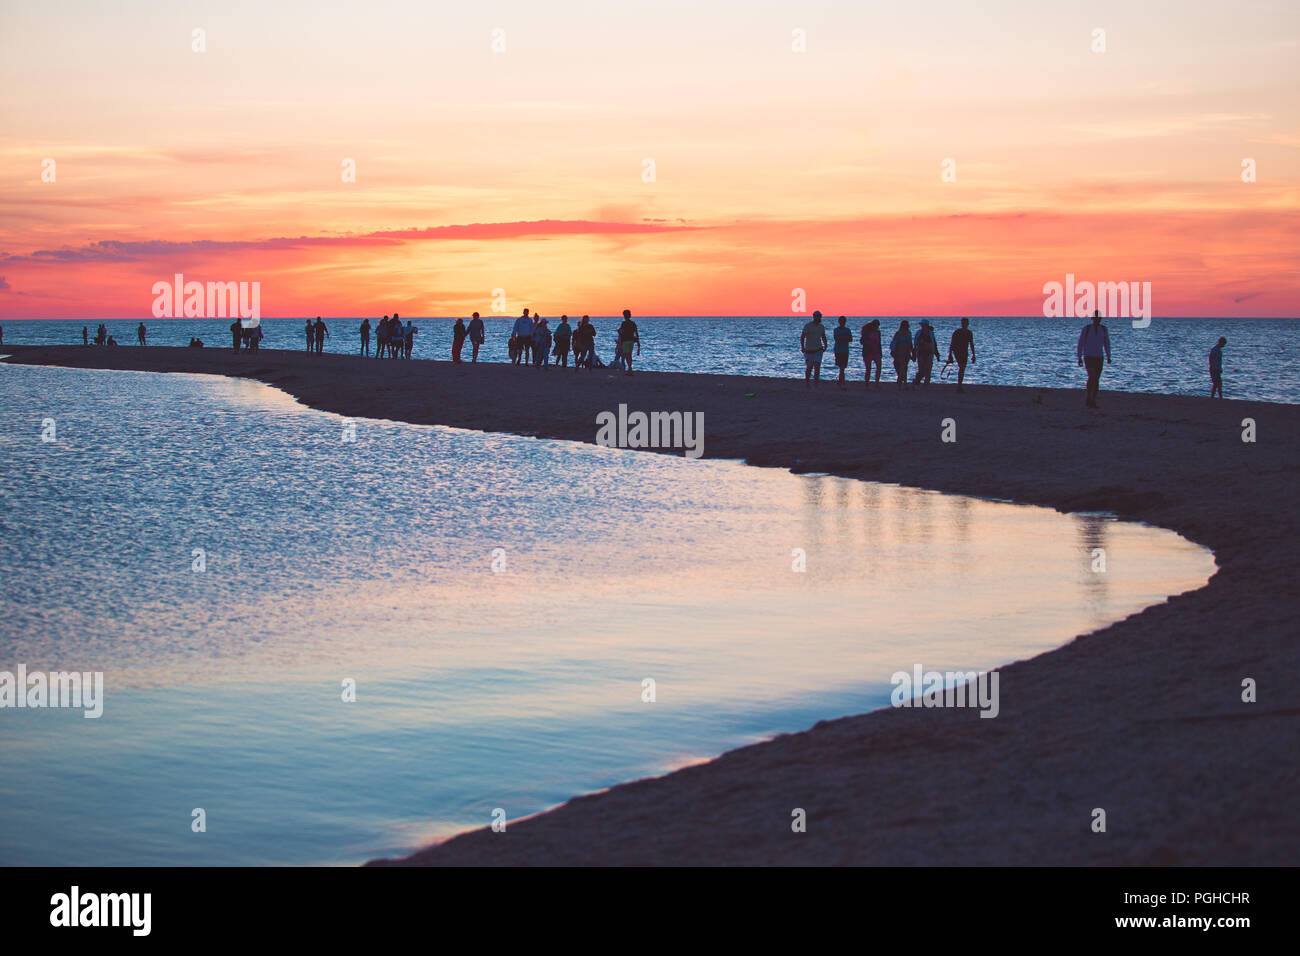 Beautiful seascape with people watching the sunset over the sea. Stock Photo